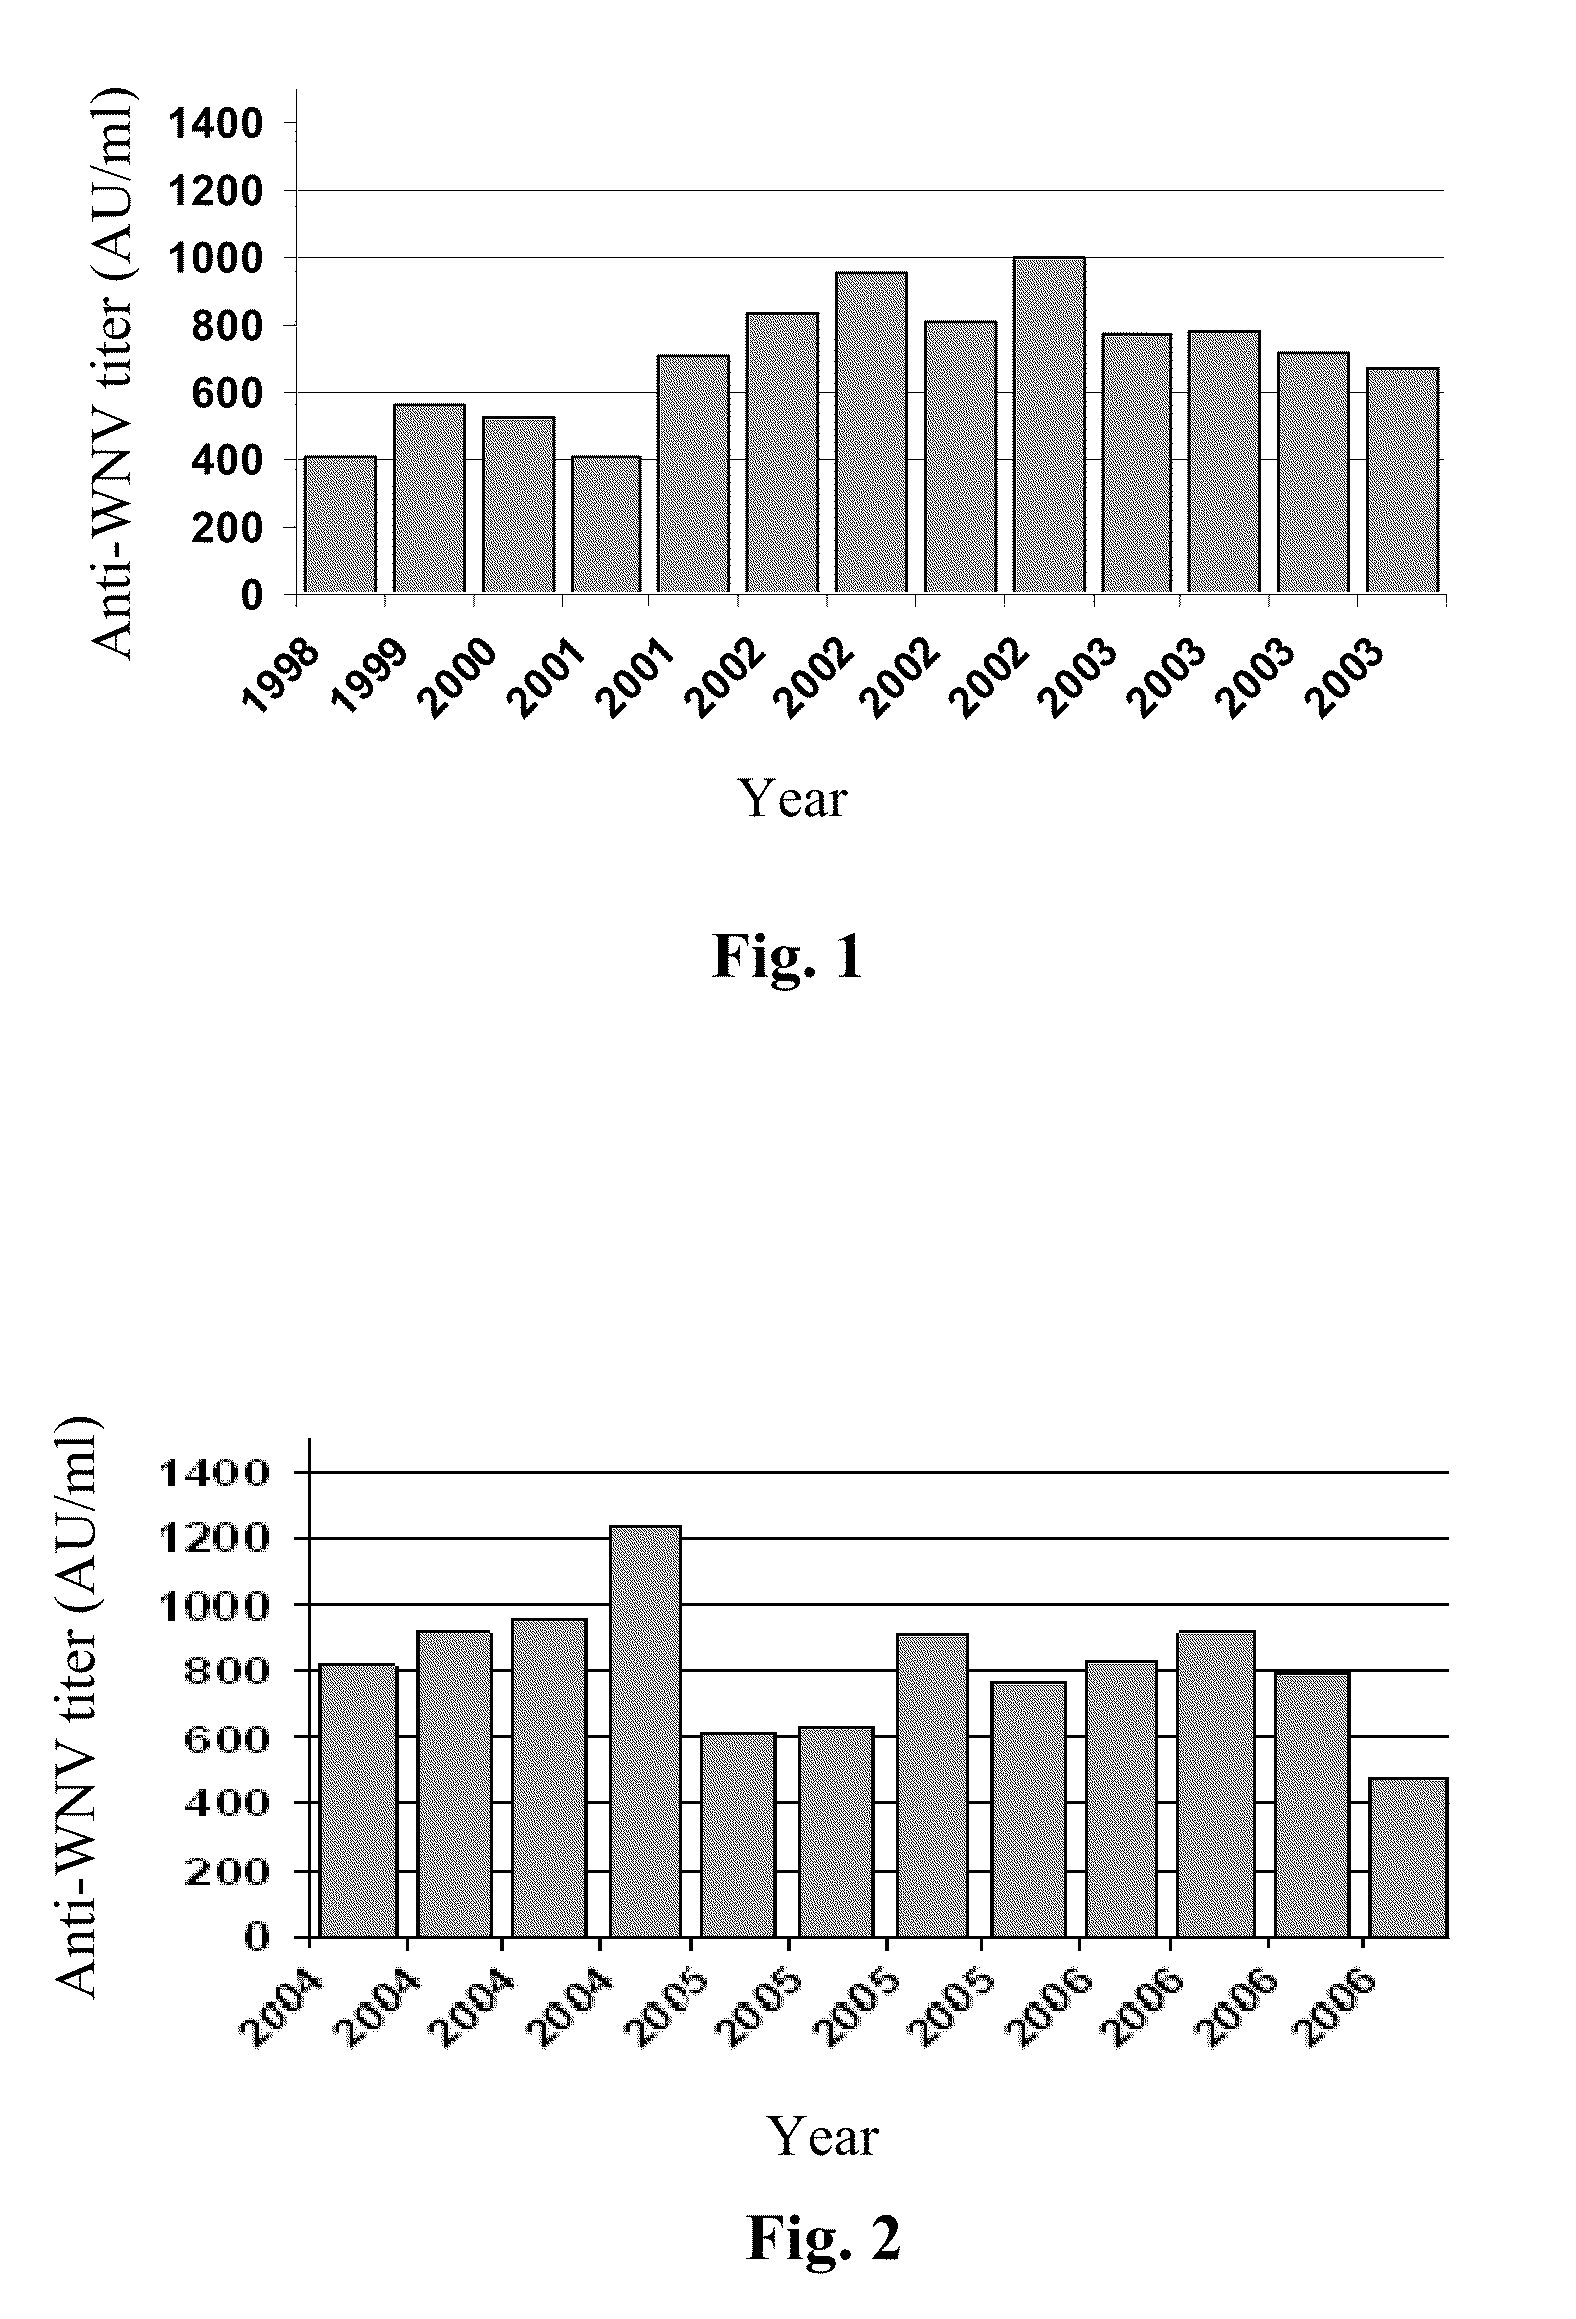 Products for prophylaxis and/or treatment of viral diseases and methods of making and using same